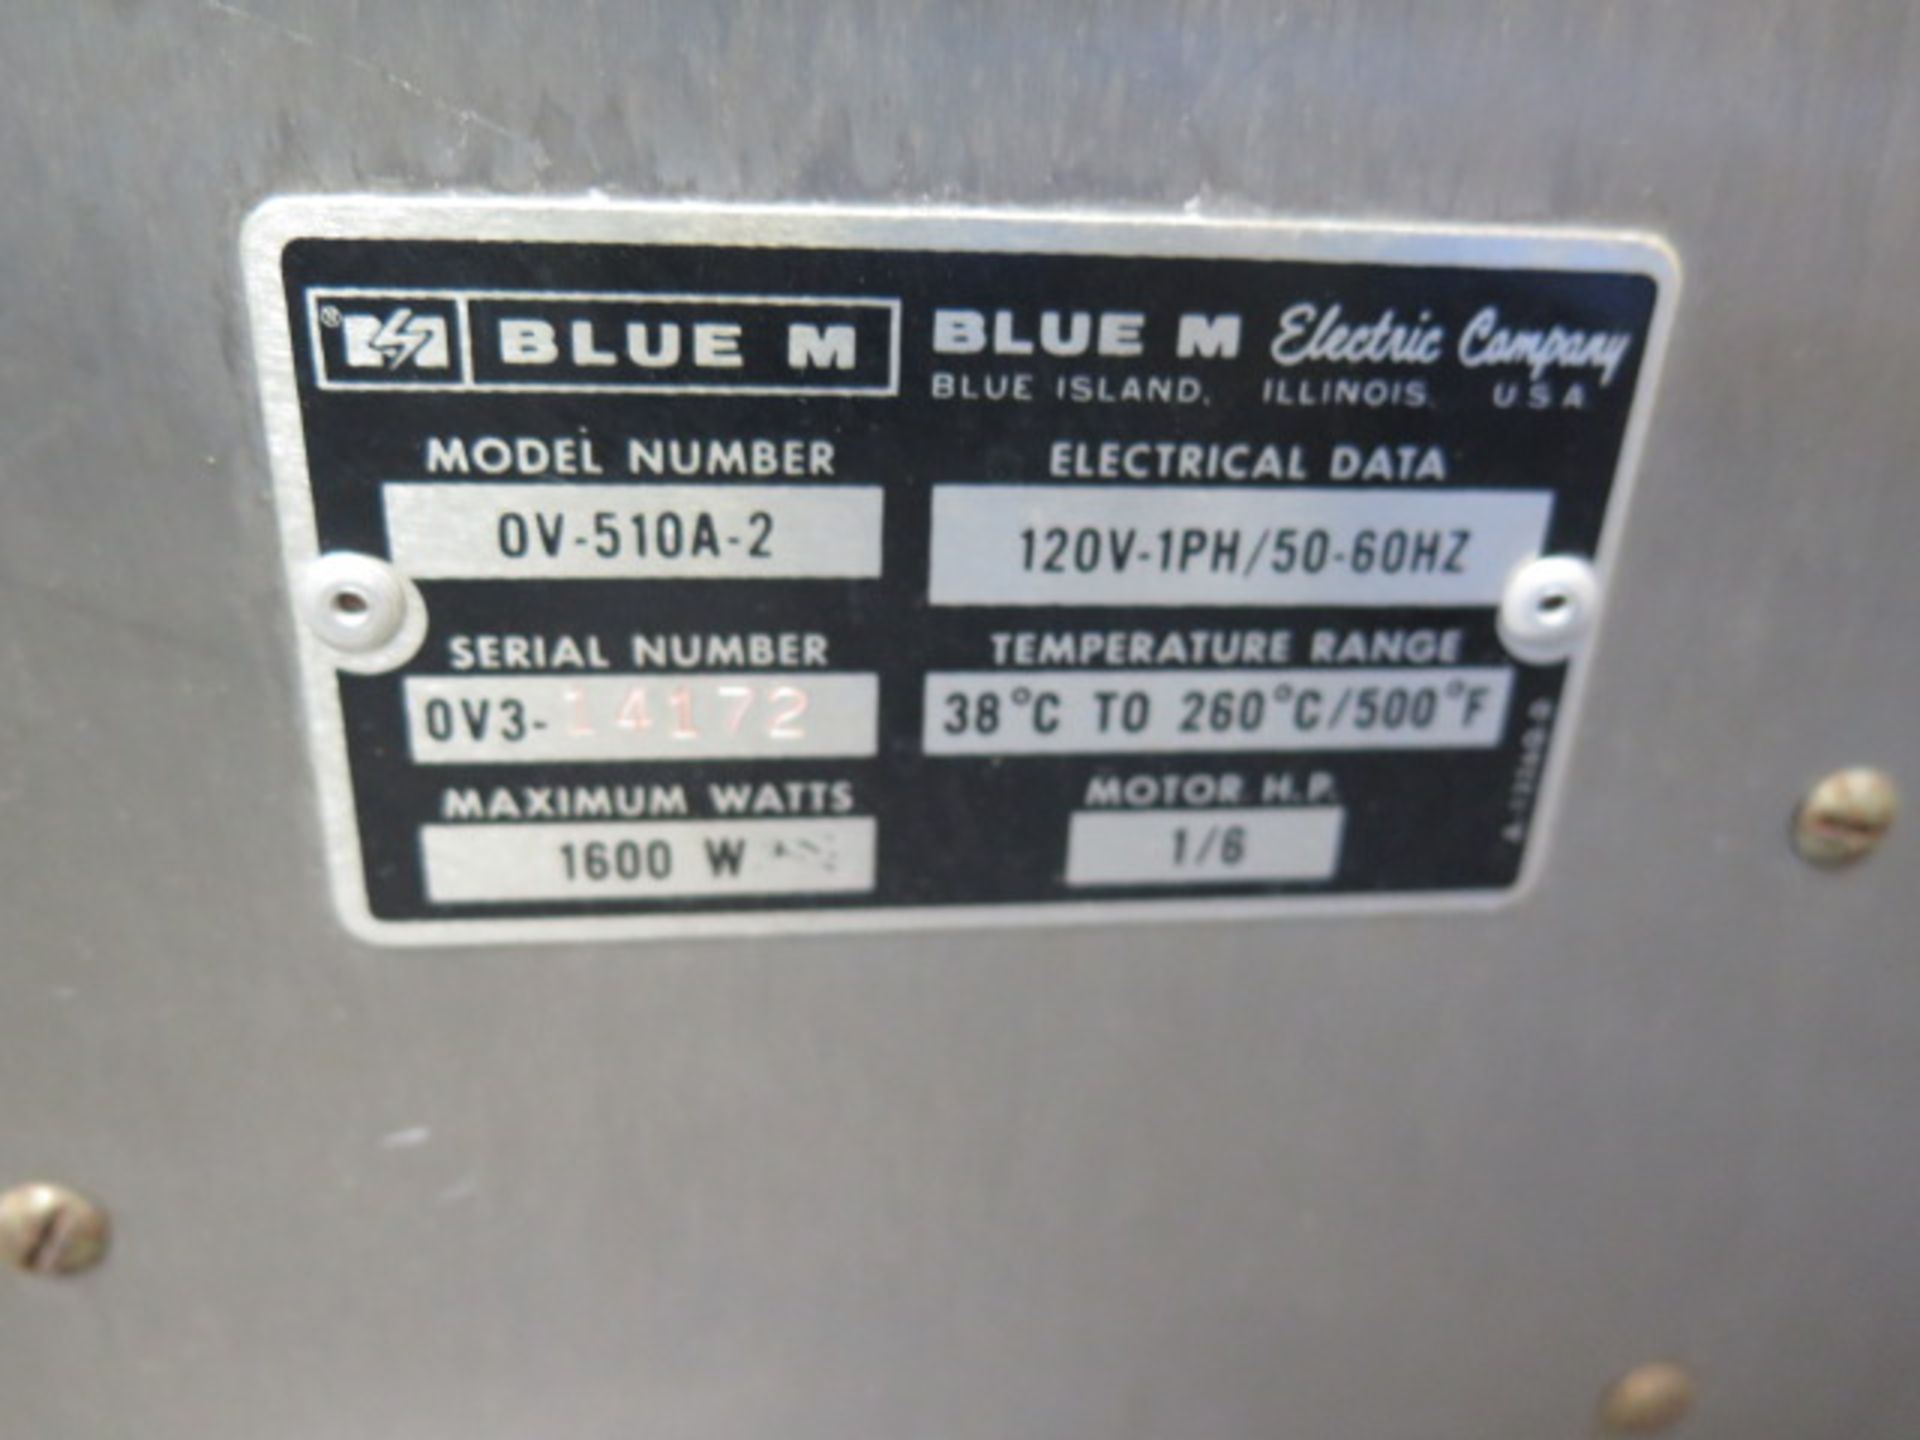 Blue-M OV-510A-2 38C to 260C / 500 Deg F Electric Oven s/n OV3-14172 (SOLD AS-IS - NO WARRANTY) - Image 6 of 6